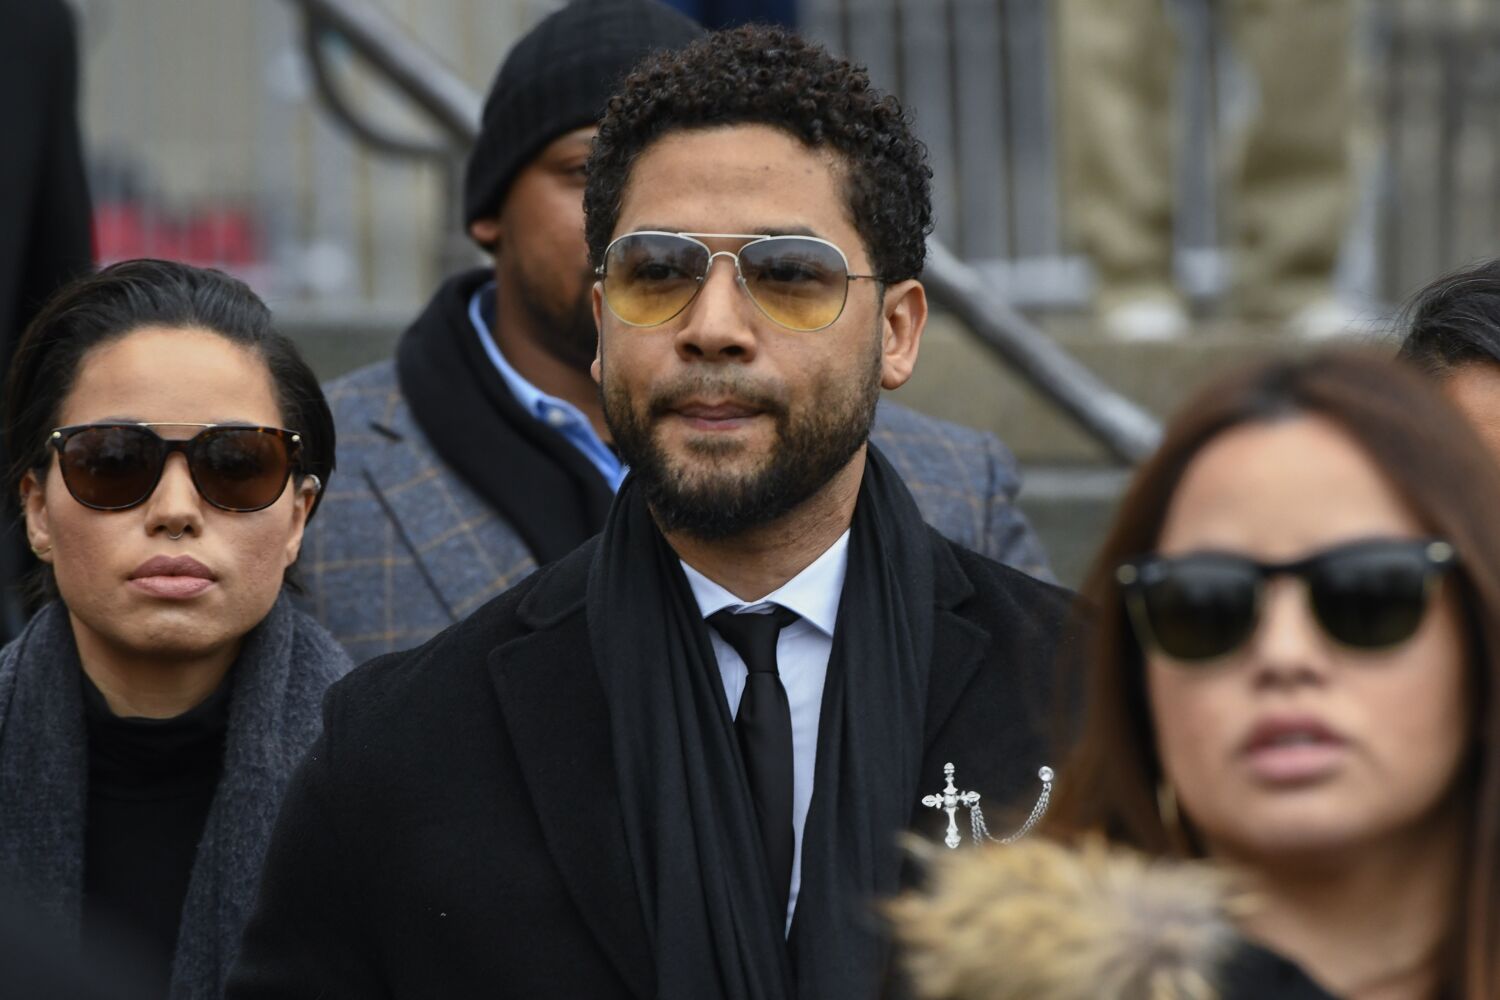 Jussie Smollett finally appeals his conviction stemming from 2019 hate-crime hoax